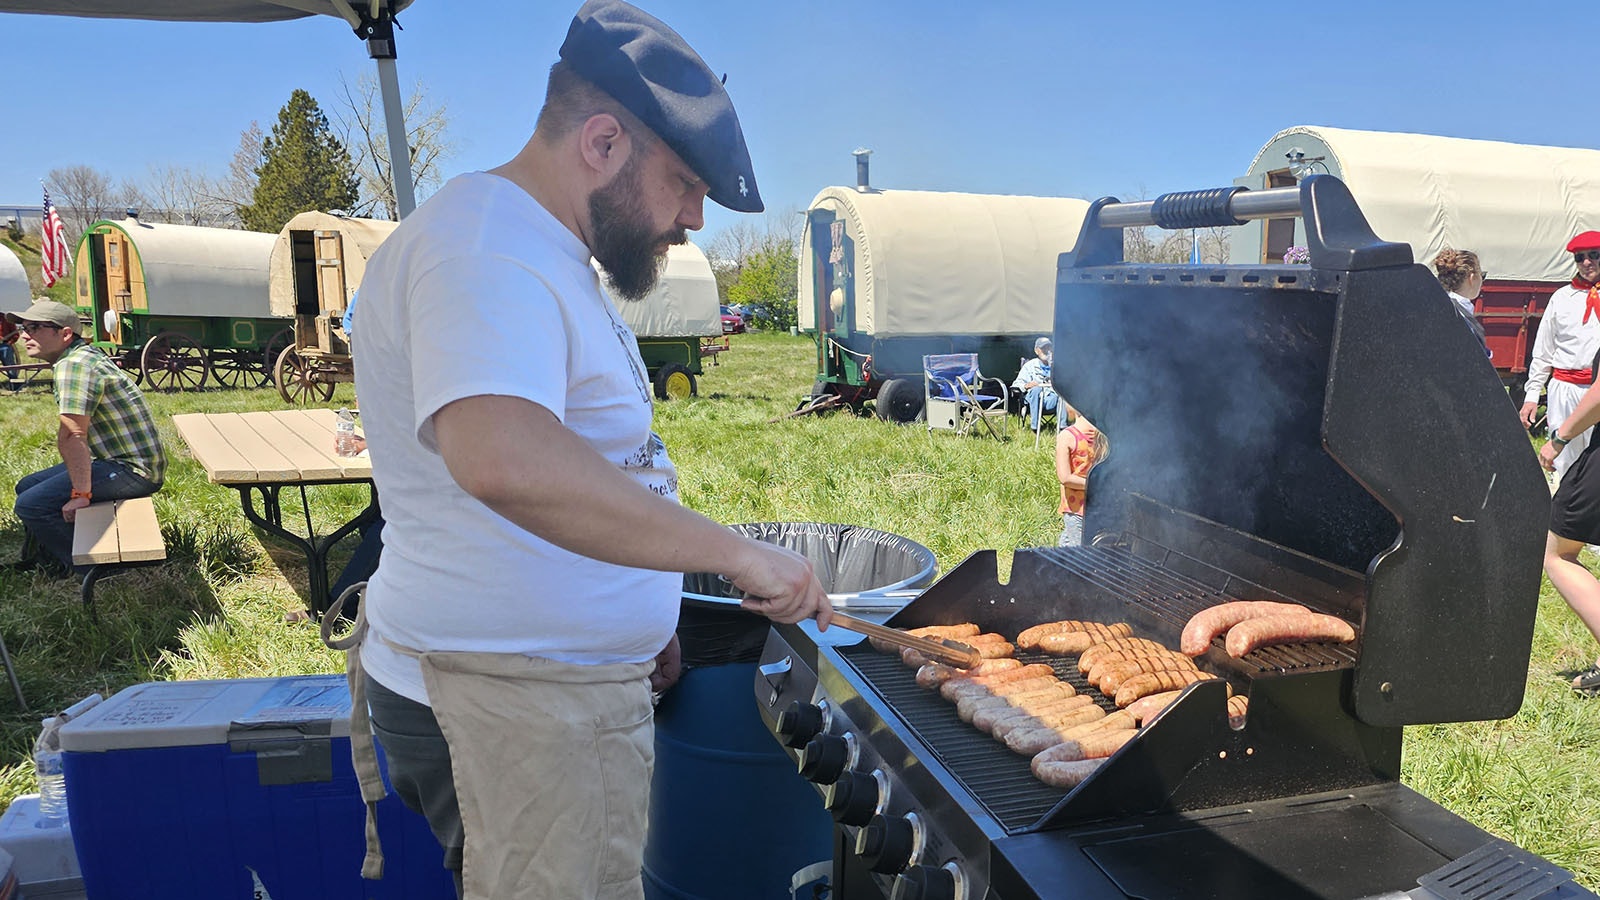 Randy Camino keeps the Lukainka, Basque sausages, turned over a smoky grill.